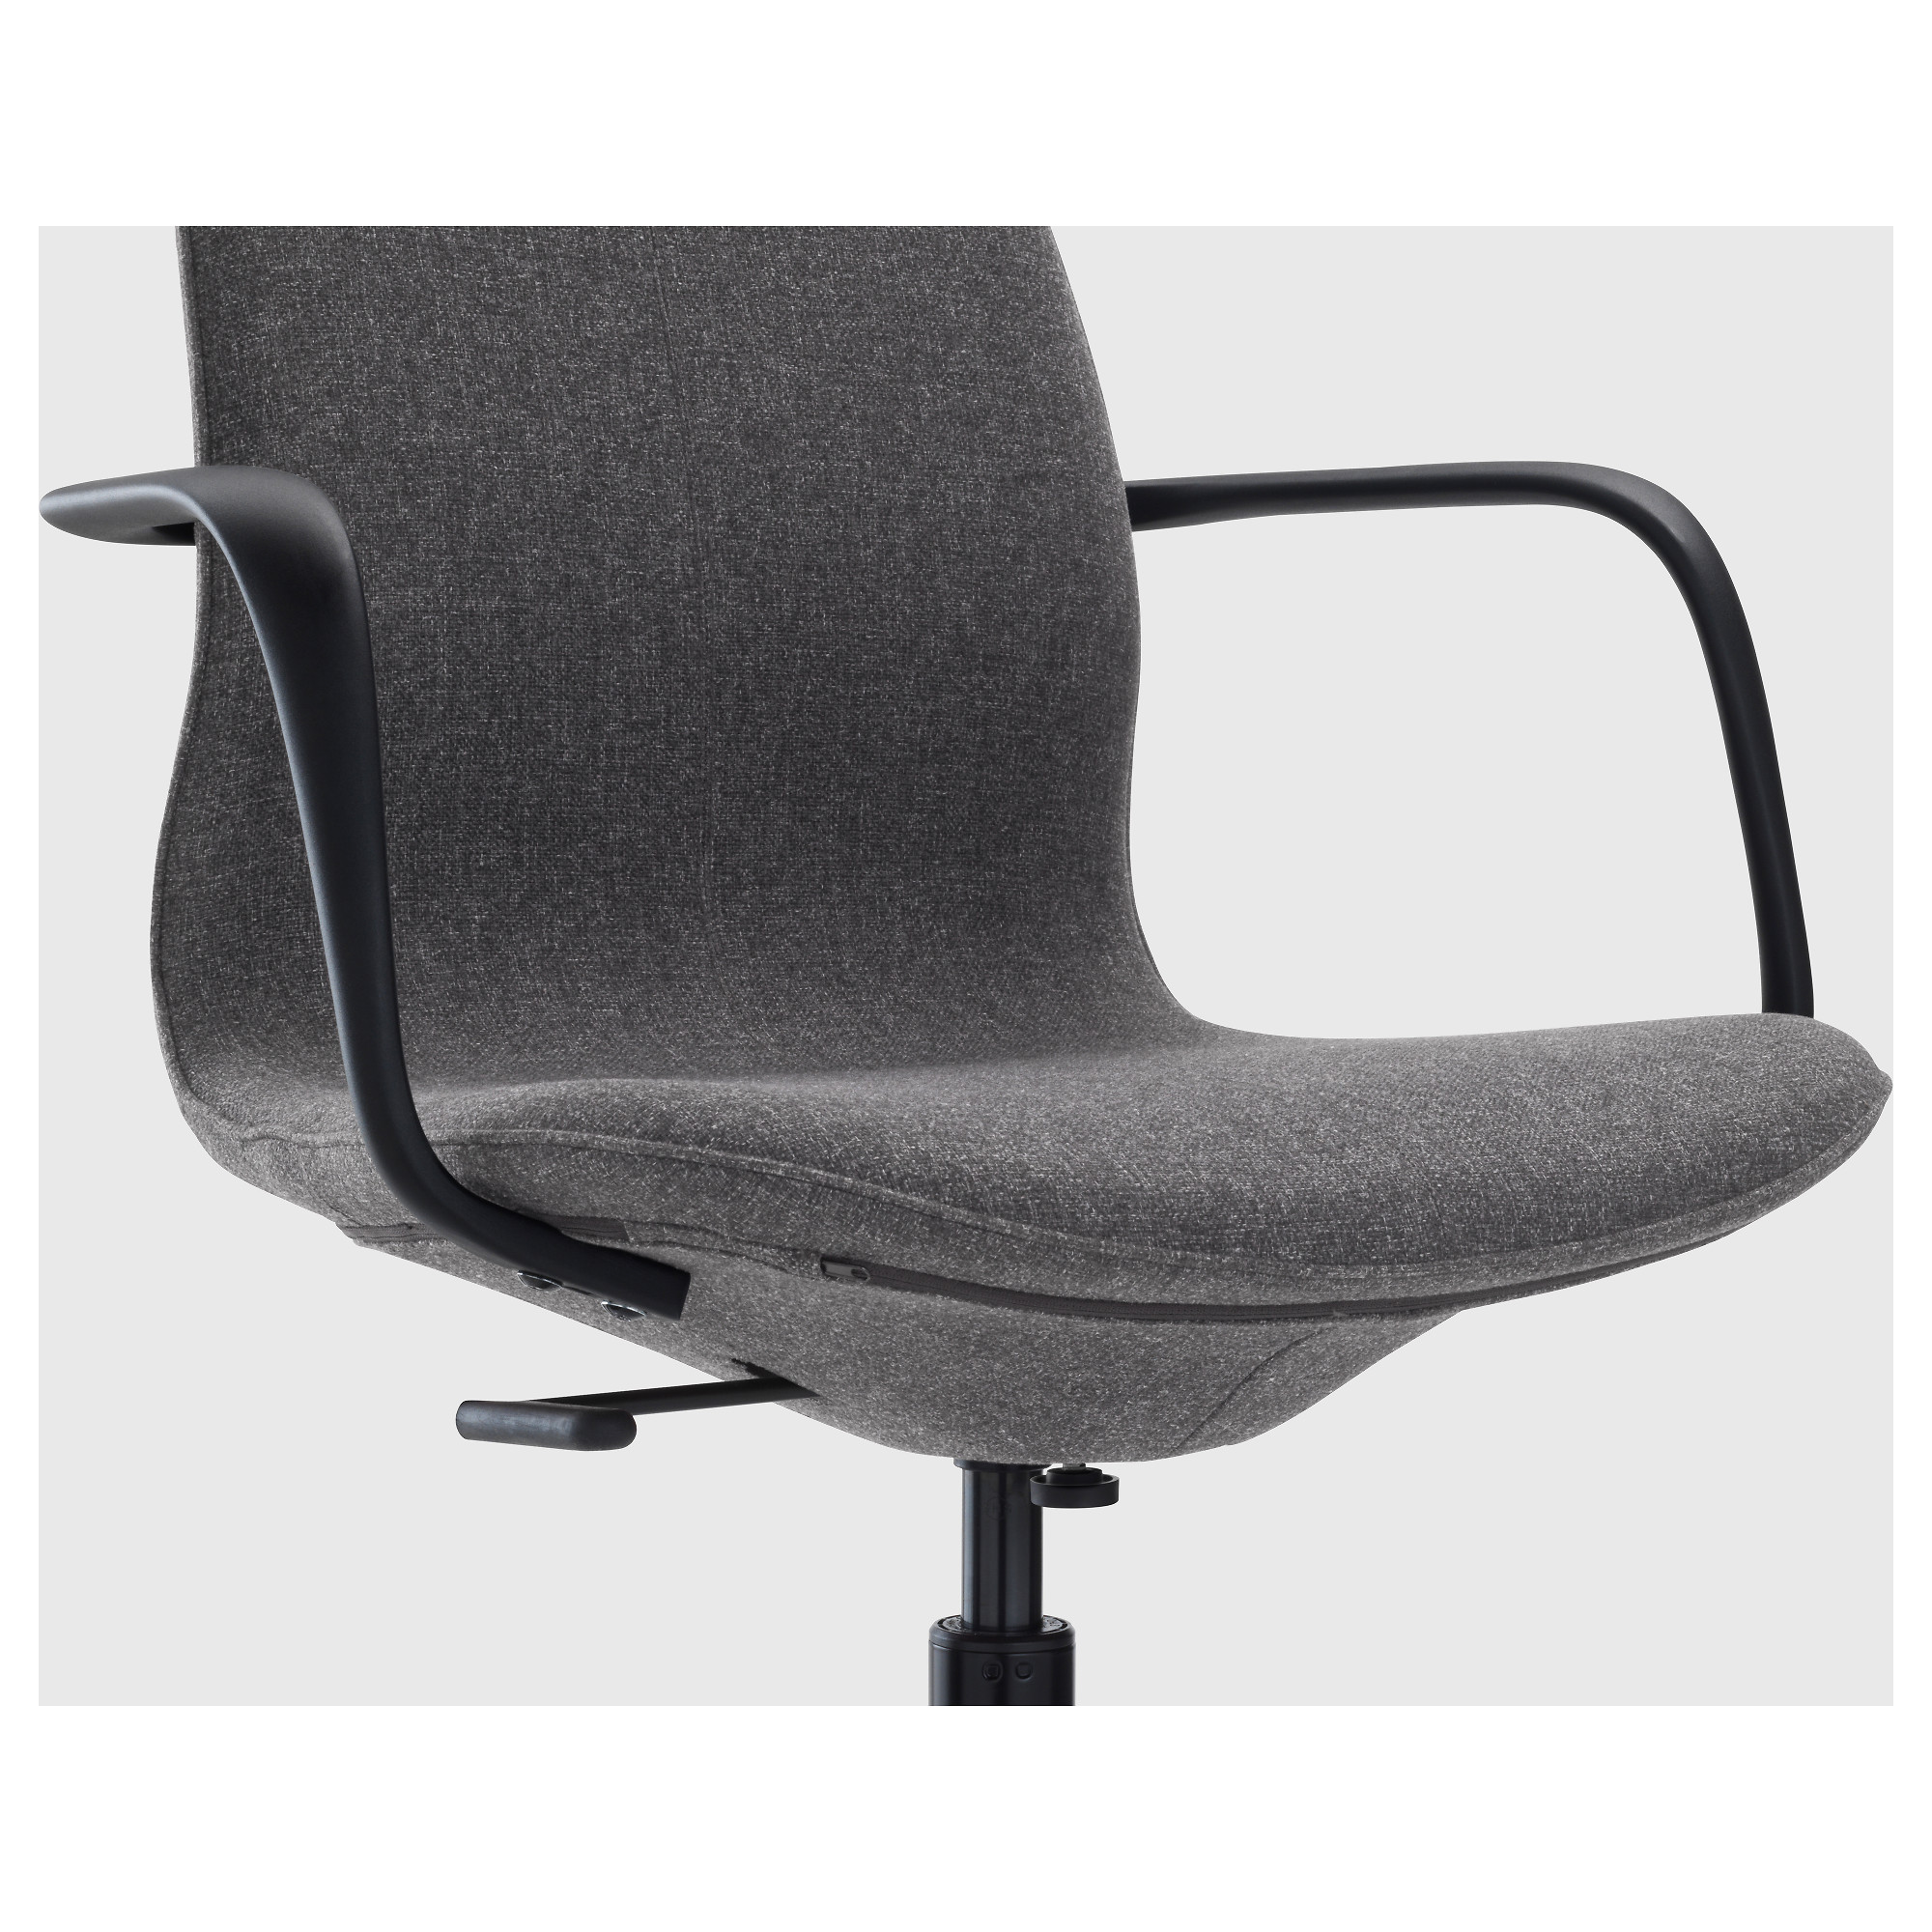 LÅNGFJÄLL conference chair with armrests